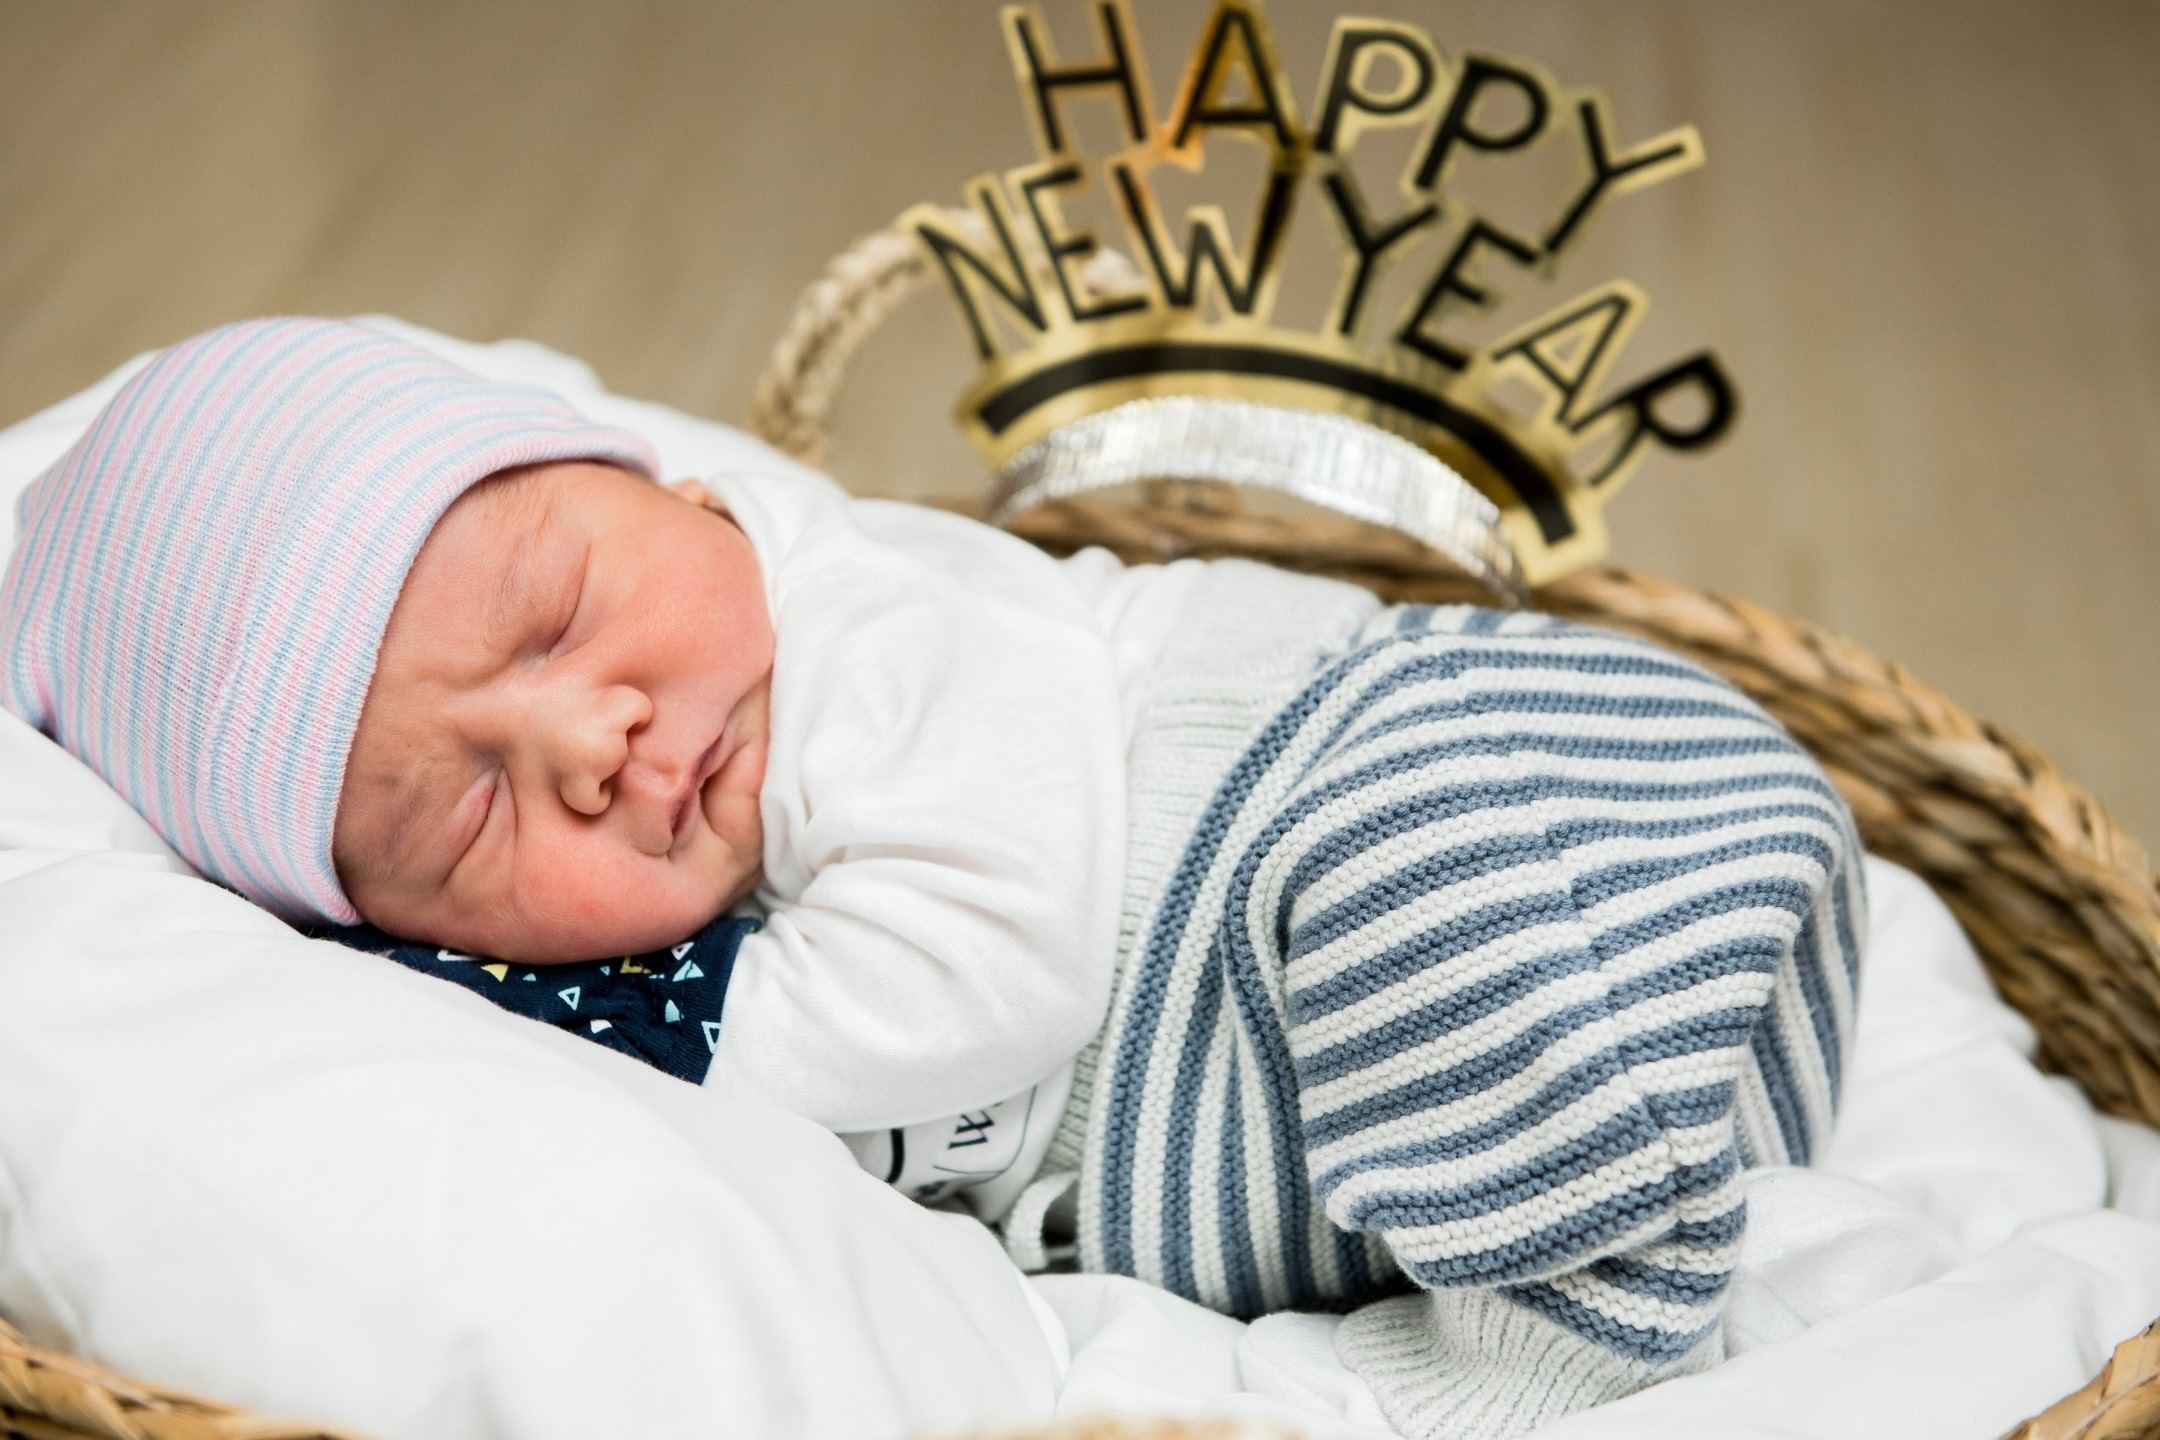 Unbelievable: Baby Born At Midnight On New Year's Eve - Year And Date Revealed!